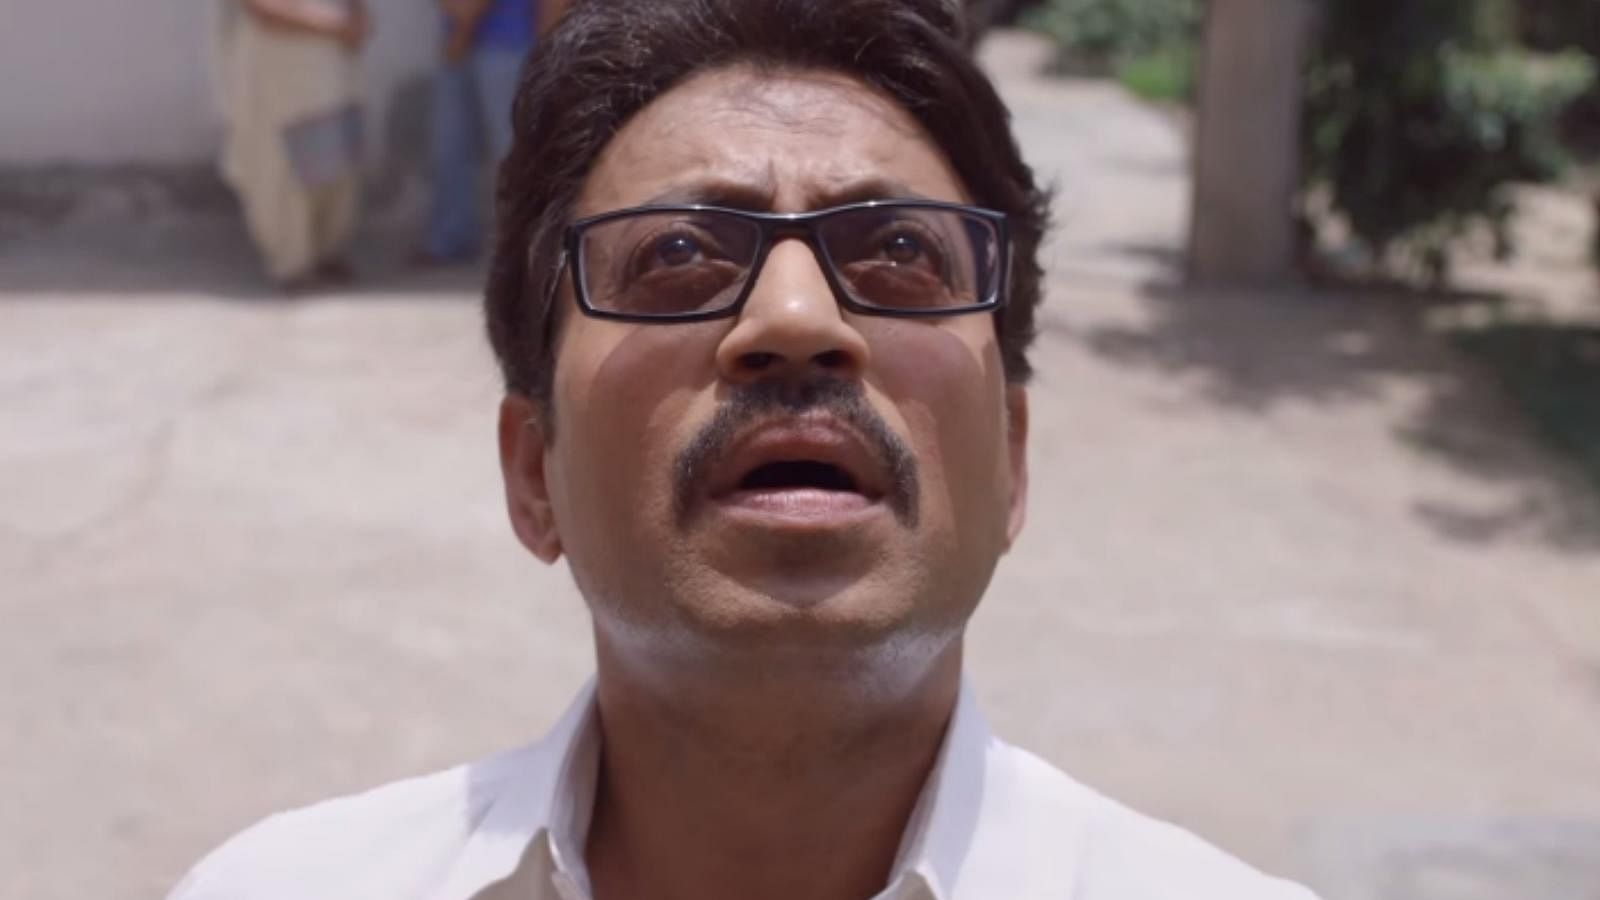 

Irrfan Khan in a still from <i>Talvar</i>. (Photo: <a href="https://www.youtube.com/watch?v=w_kEnbHYb2I">YouTube/Junglee Pictures</a>)